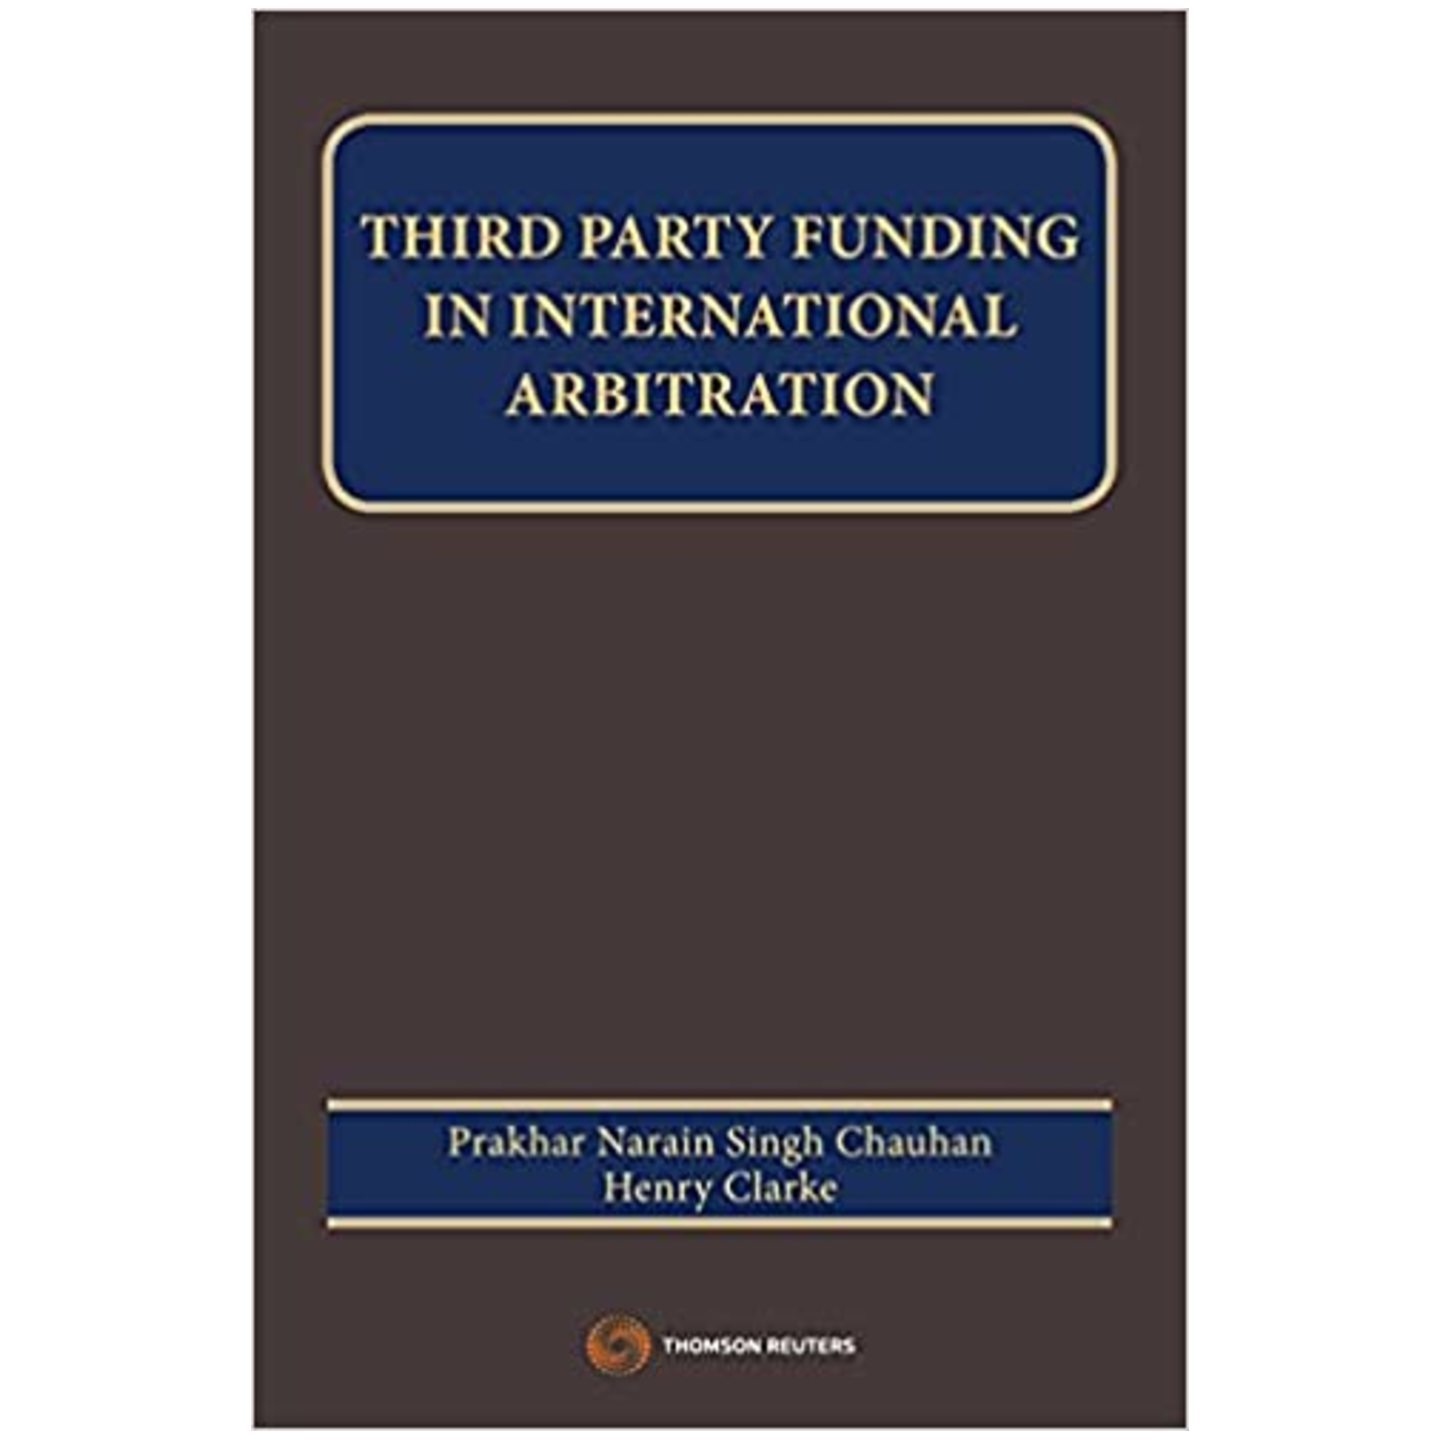 Third party funding in international arbitration